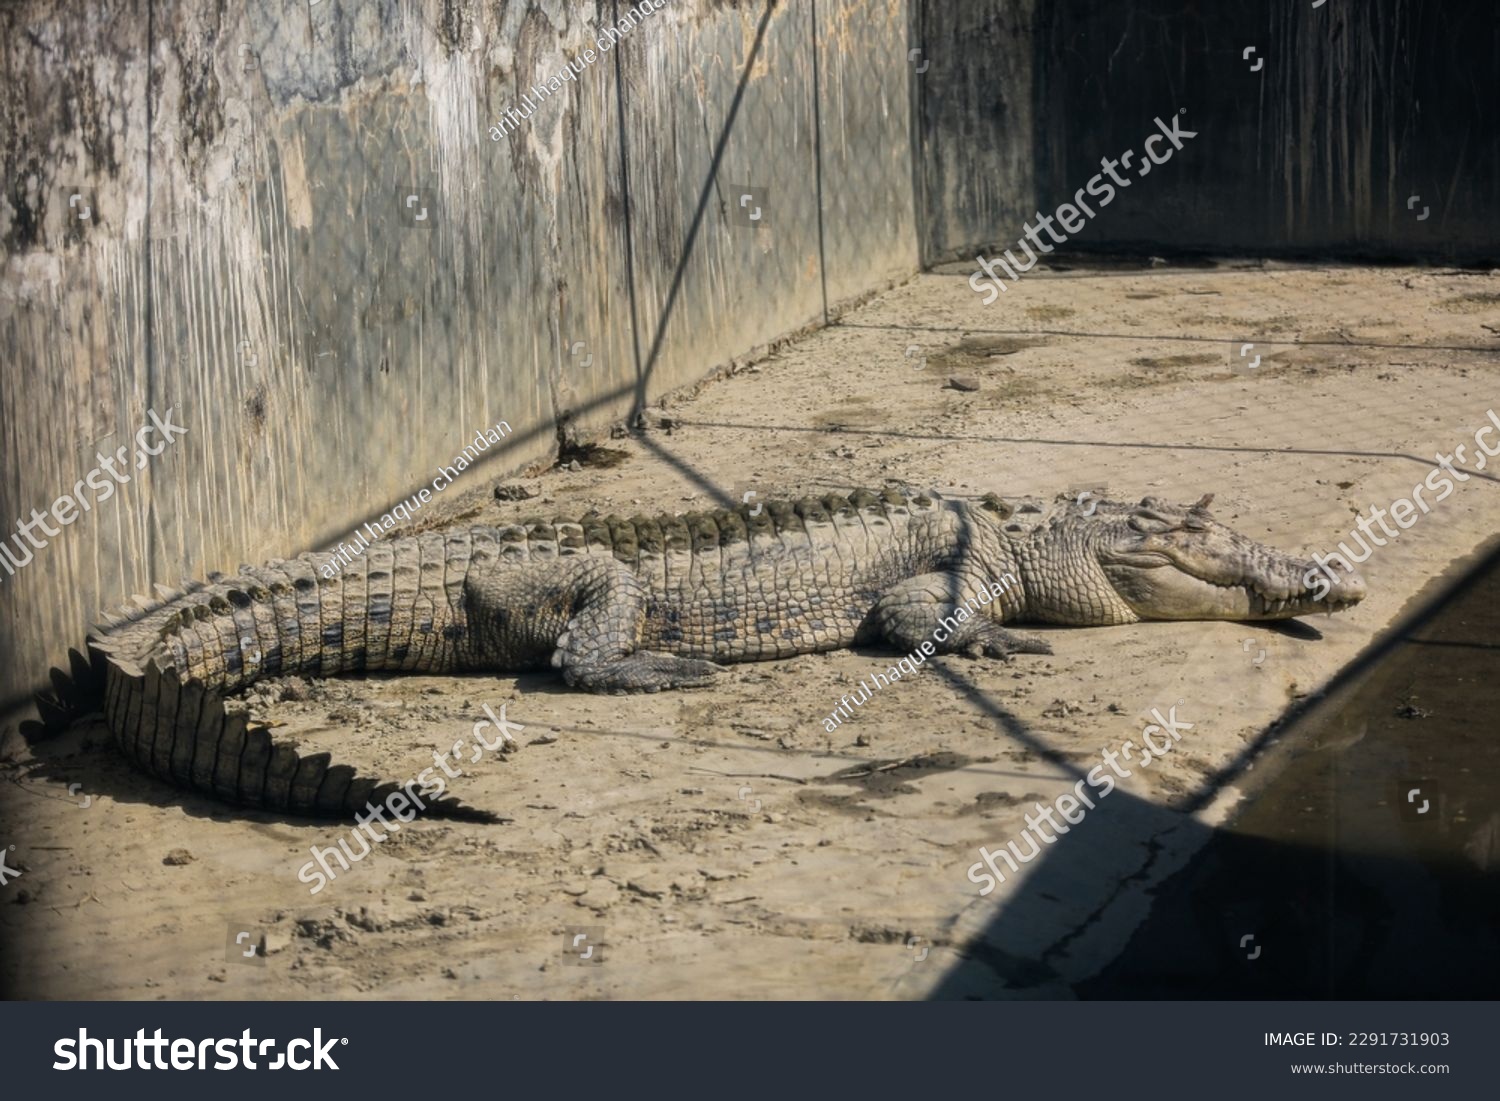 Crocodiles also aestivate during long periods of drought. To create a place to hibernate, they dig out a burrow in the side of a riverbank or lake and settle in for a long sleep. #2291731903